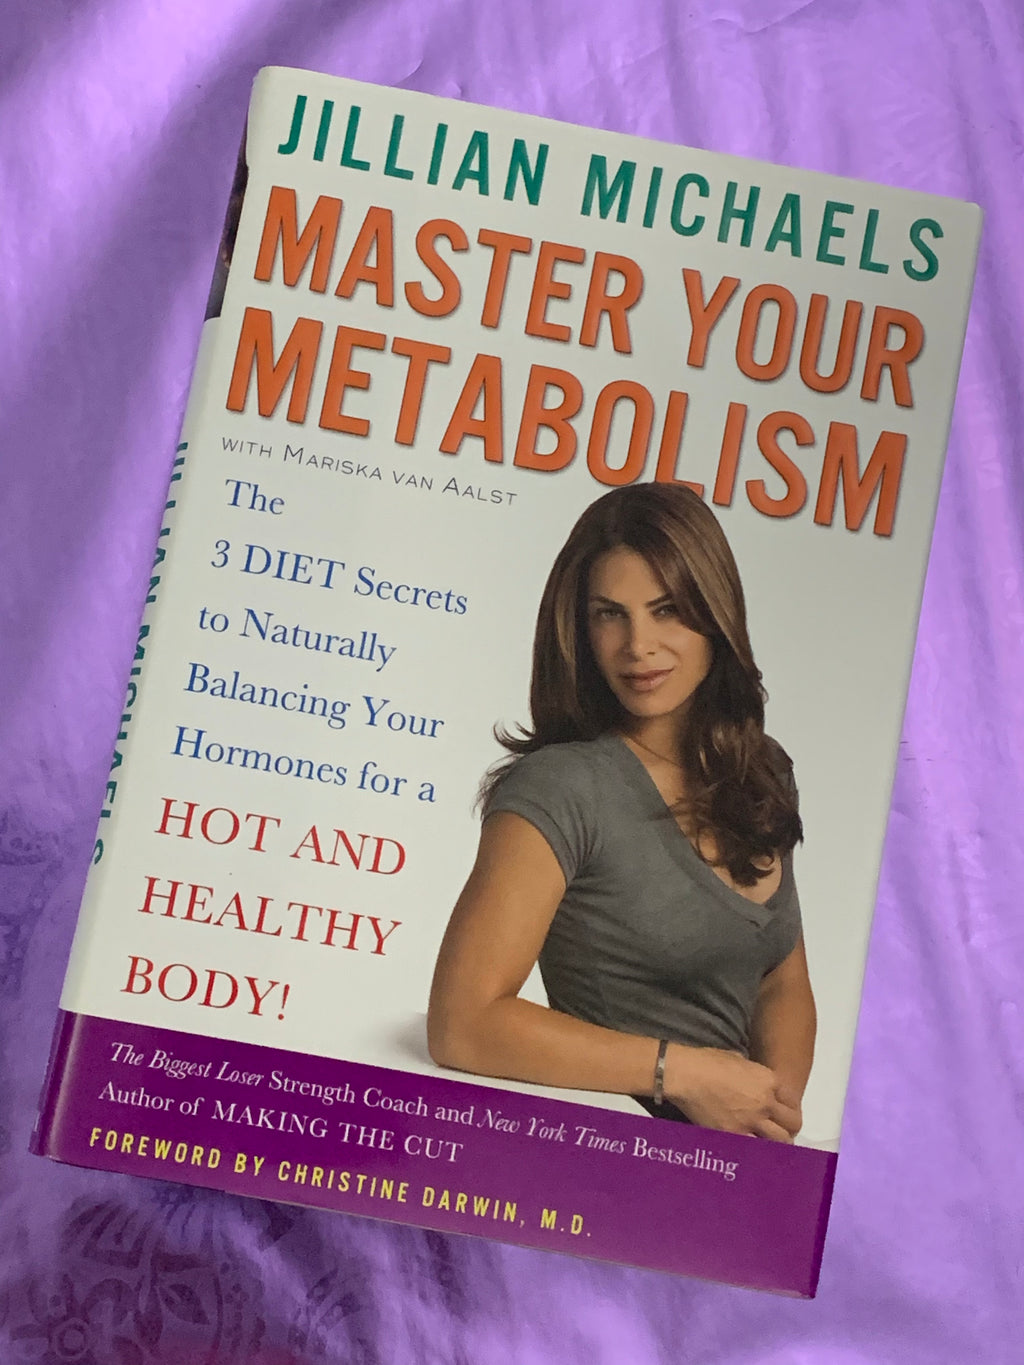 Master Your Metabolism- By Jillian Michaels